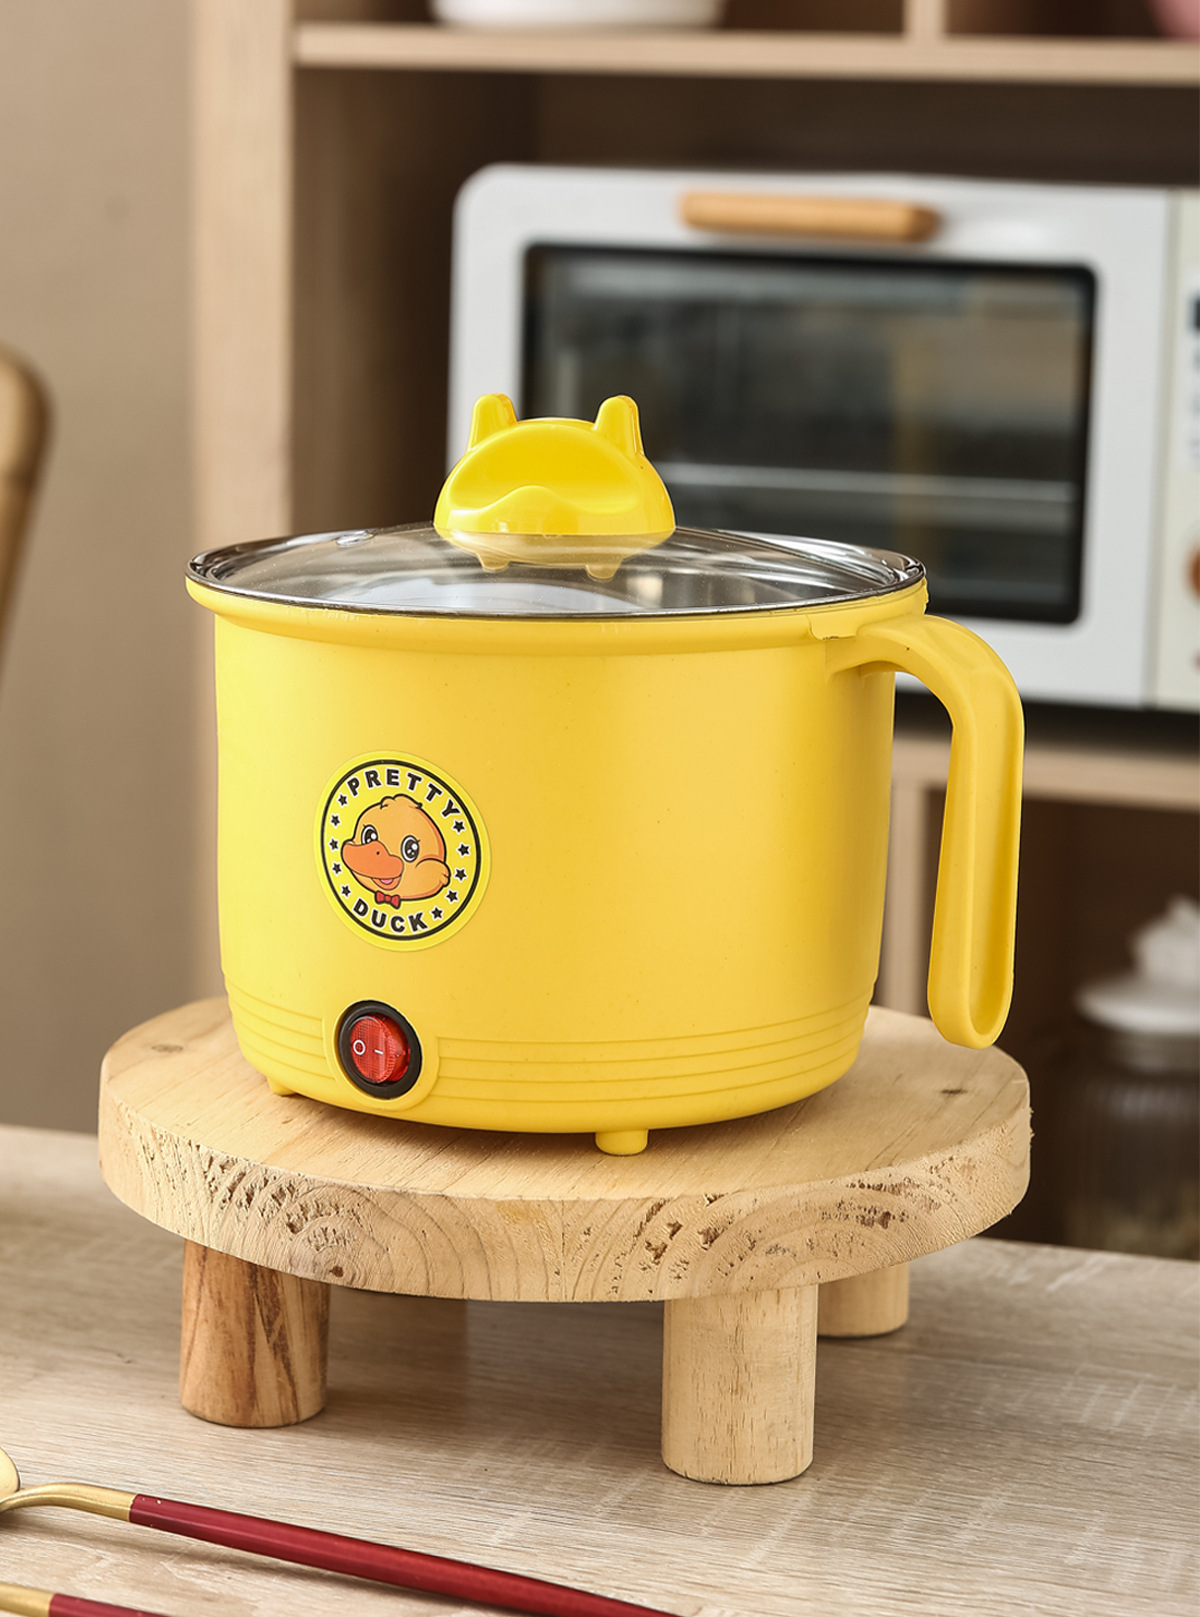 Multi-Functional Student Pot Small Dormitory Electric Food Warmer Small Yellow Duck Electric Caldron Stainless Steel Cooking Integrated Non-Stick Pan